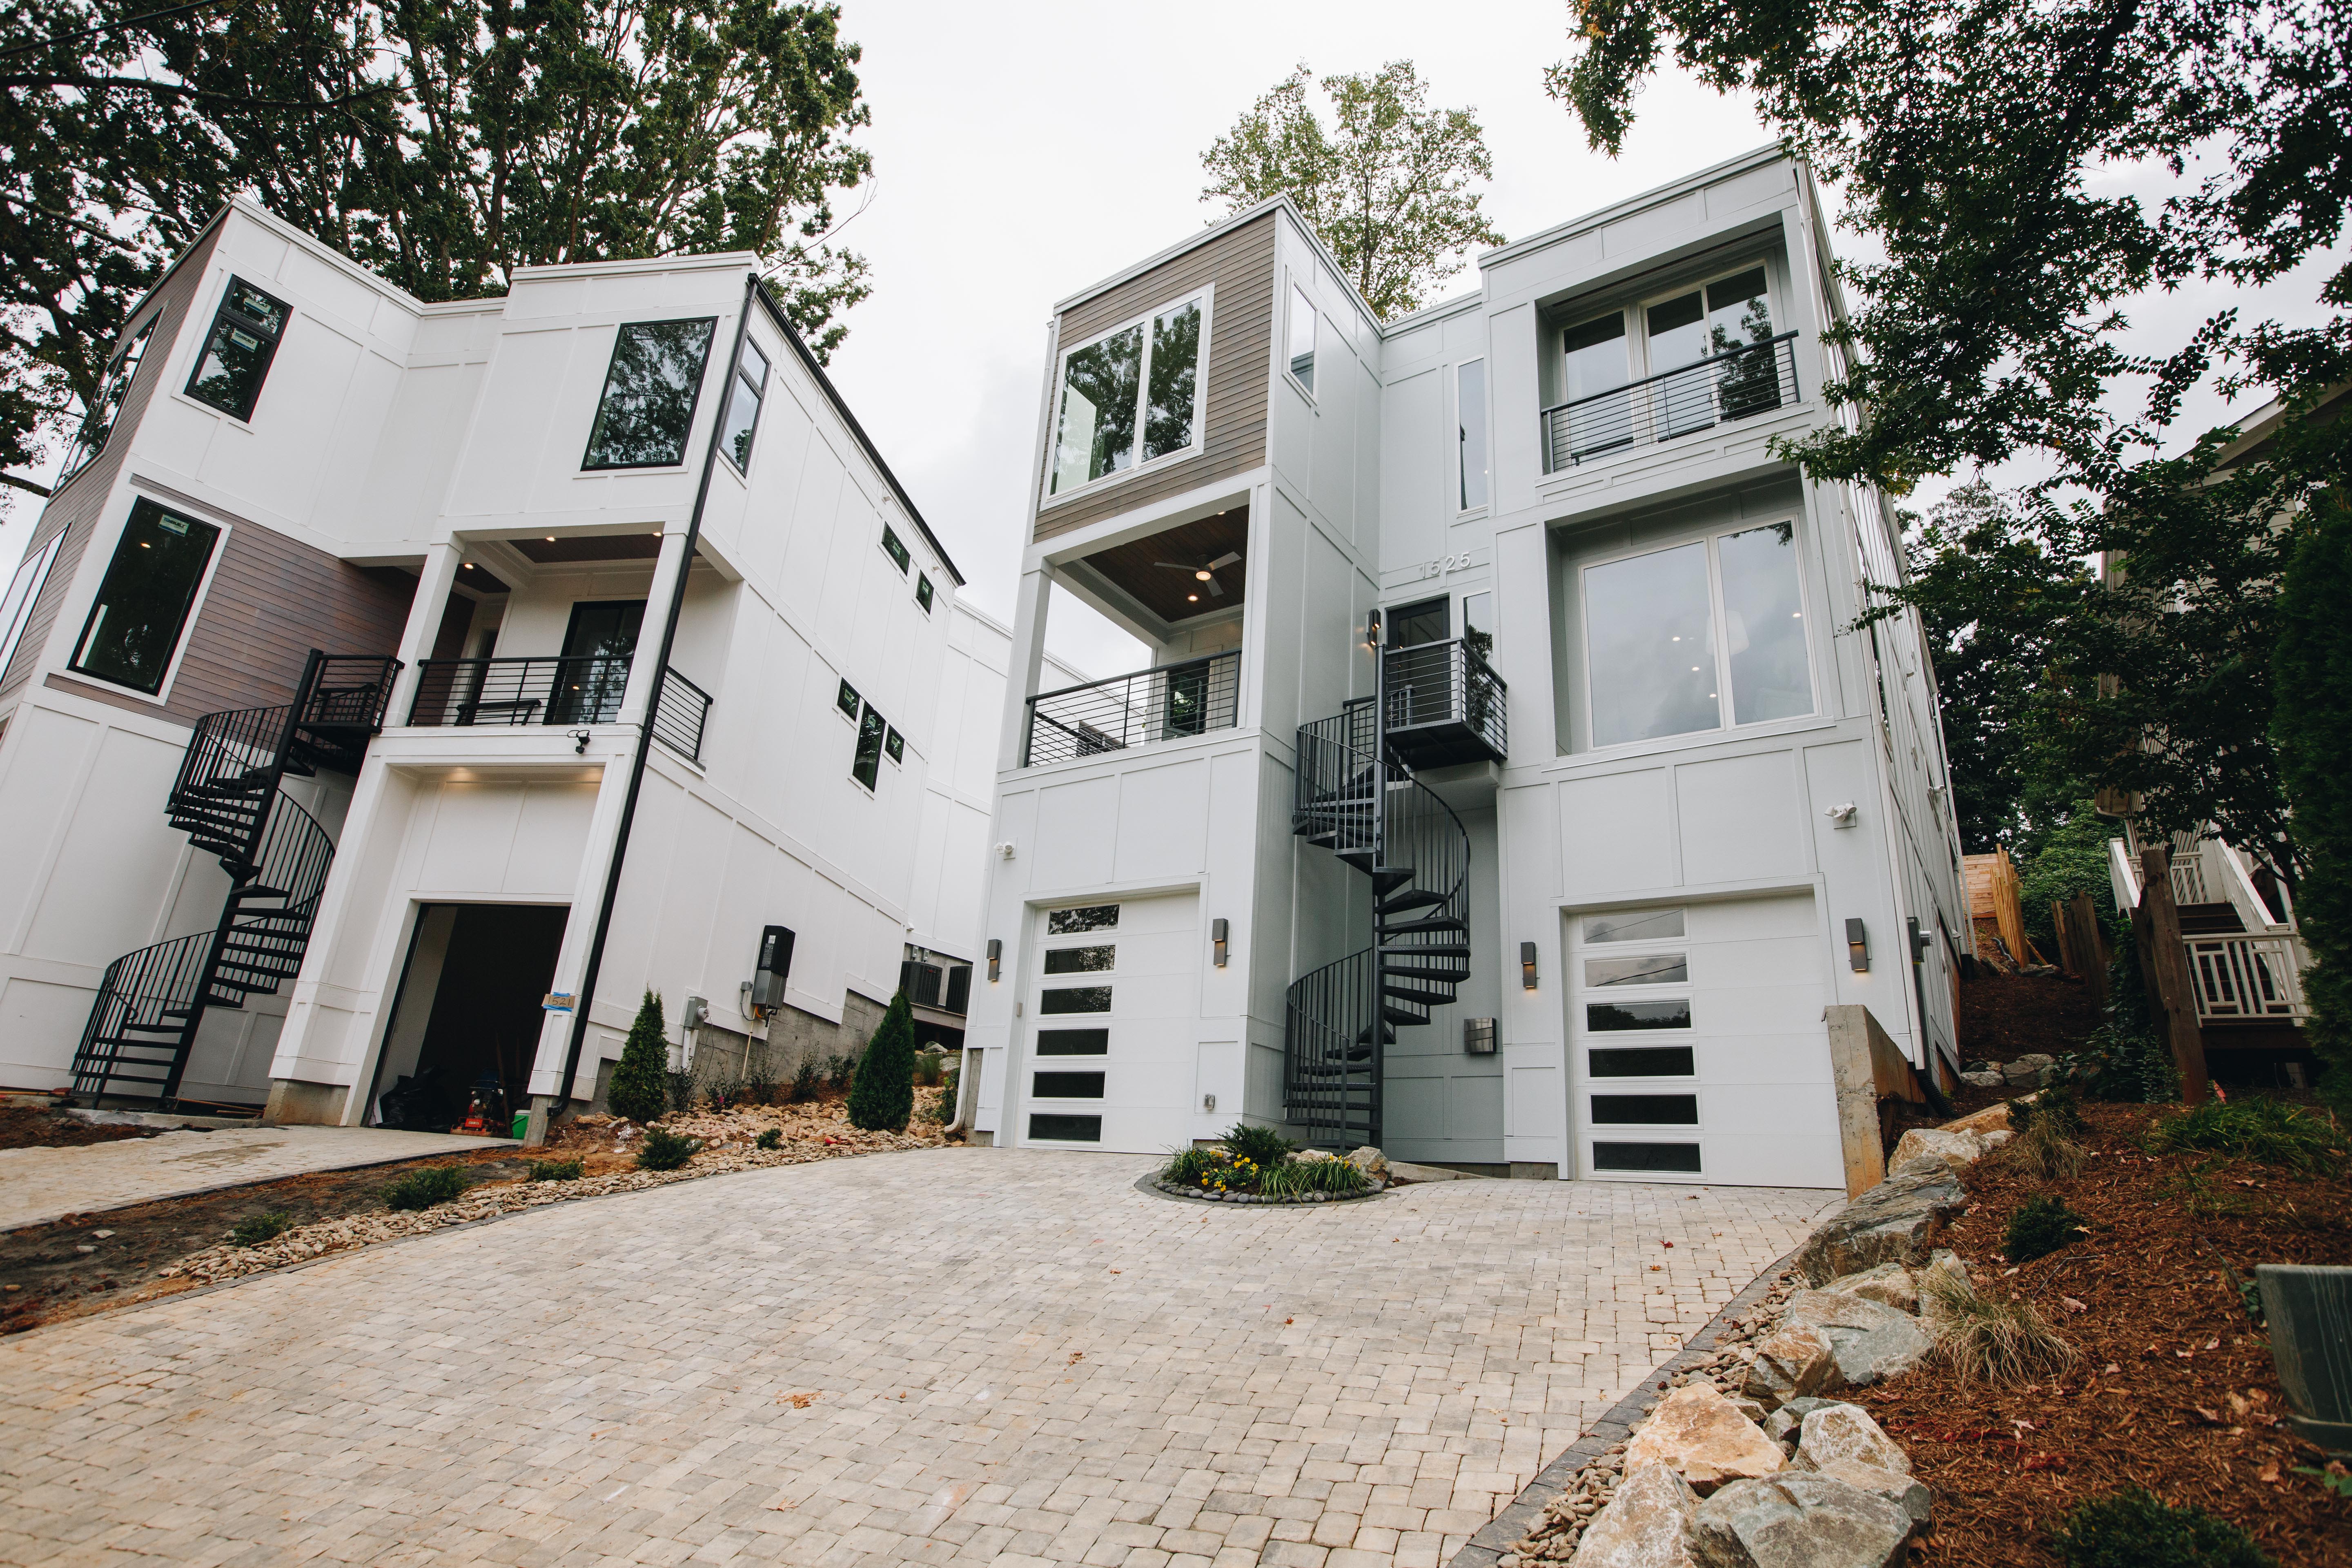 This Midwood home is the future of new home construction in CLT